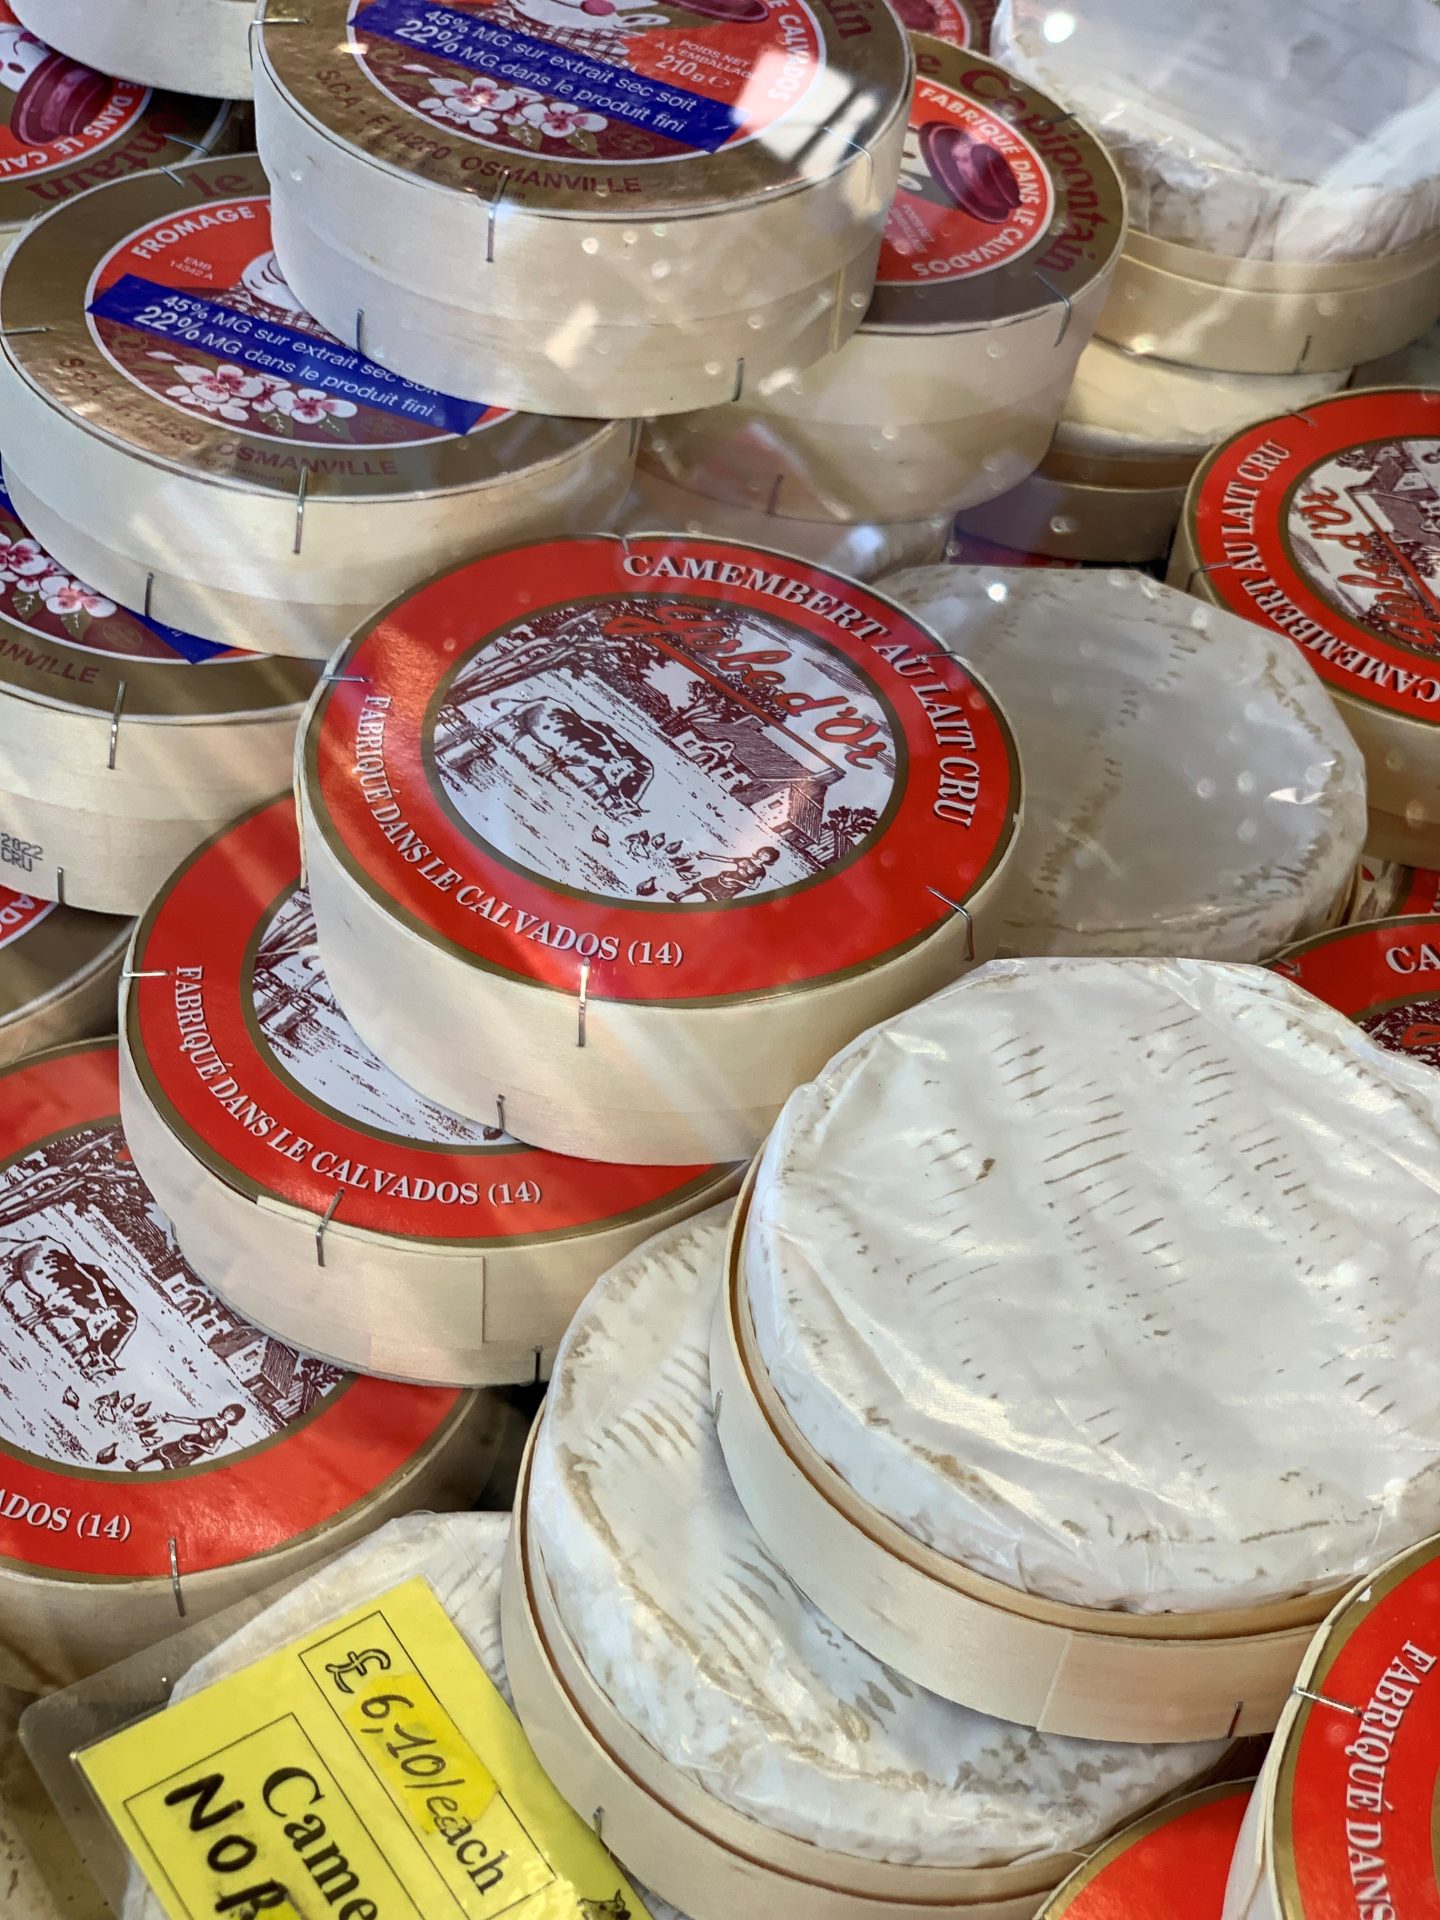 A close up of a display of wheels of camembert